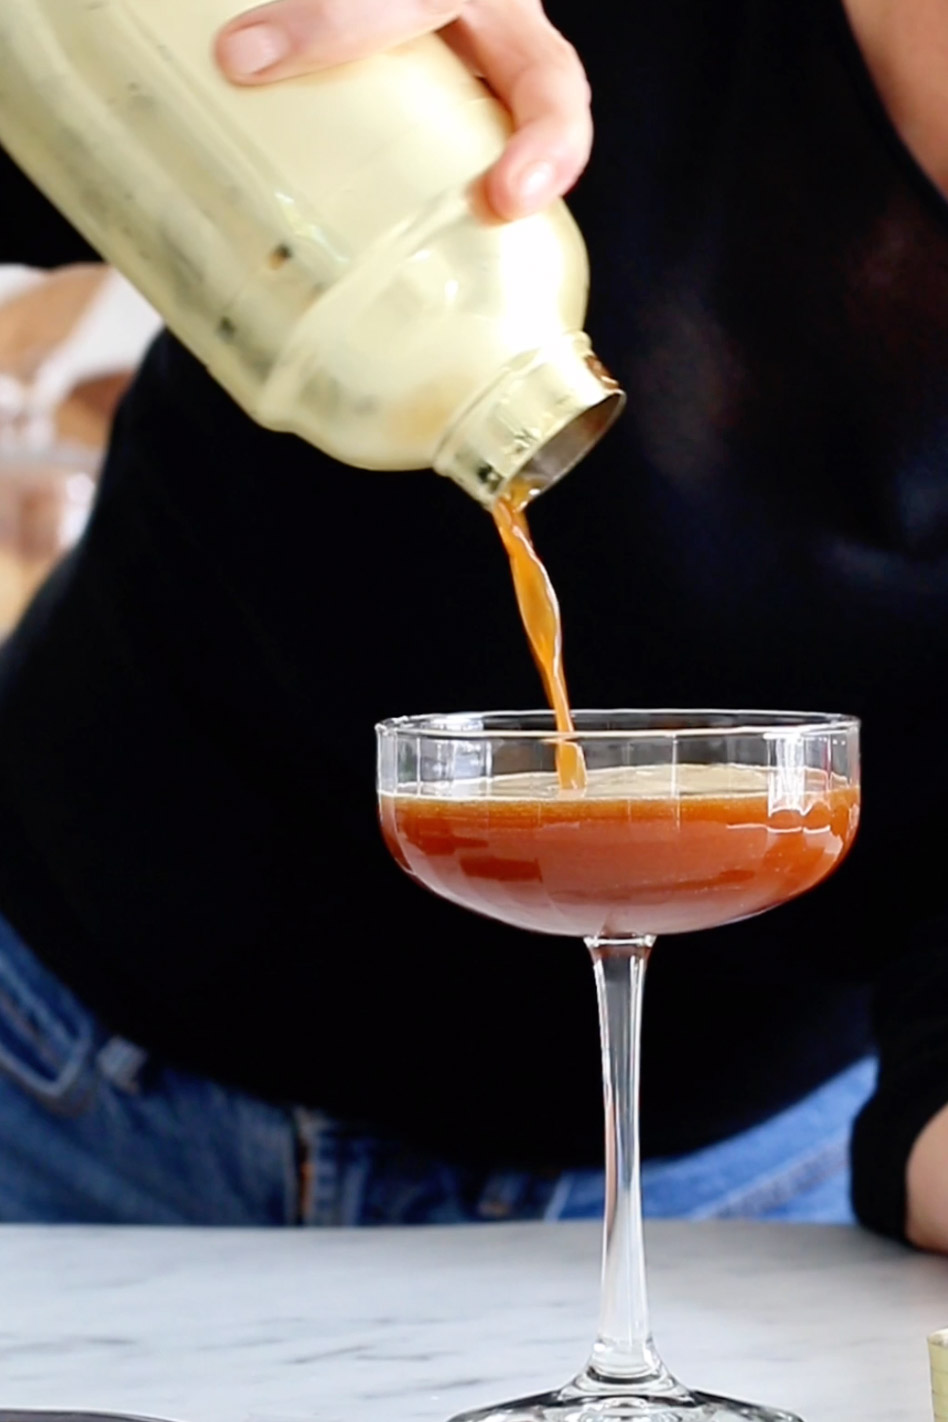 A woman preparing a shaken carajillo by pouring a drink into a glass.